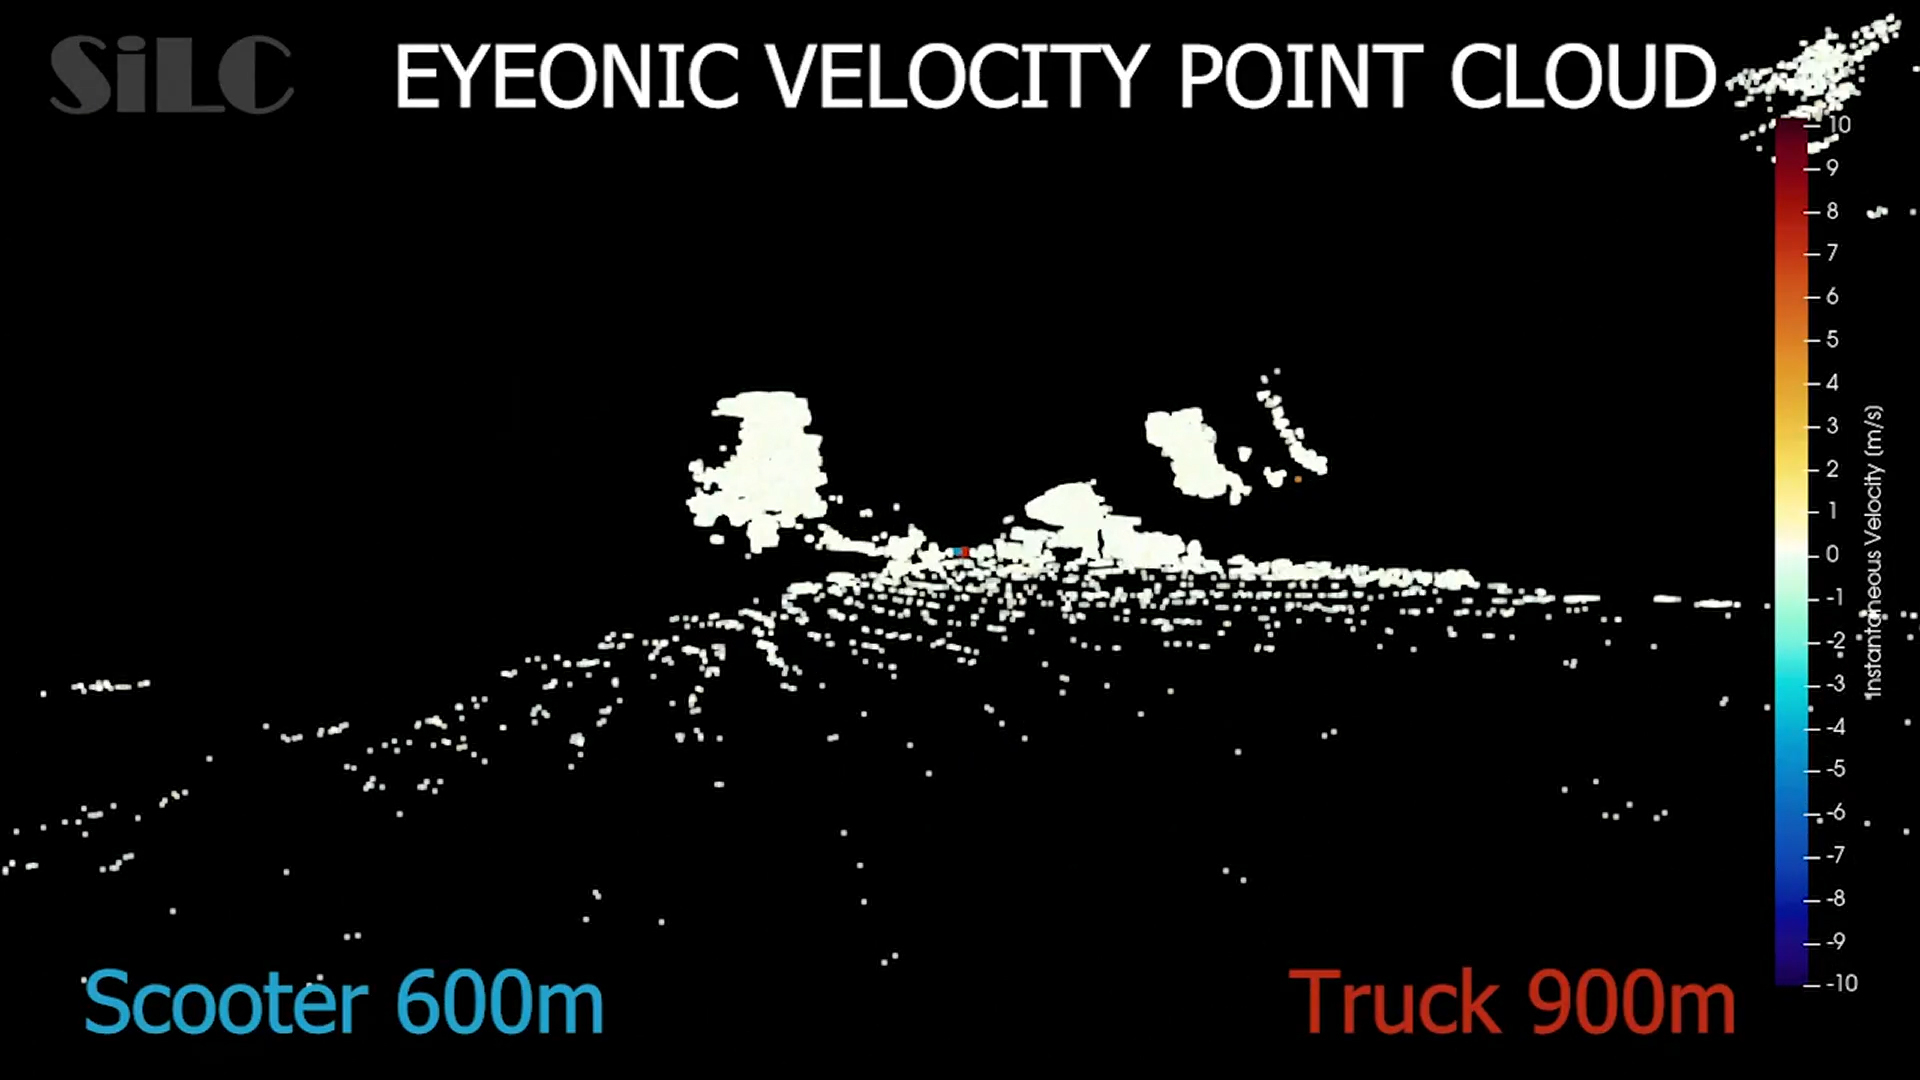 SiLC demonstrates the industry’s longest detection range of beyond 1,000 meters with its Eyeonic Vision Sensor. Three fly-throughs with the same point cloud are colored to illustrate the different modalities, including distance, instantaneous velocity, and polarization intensity.